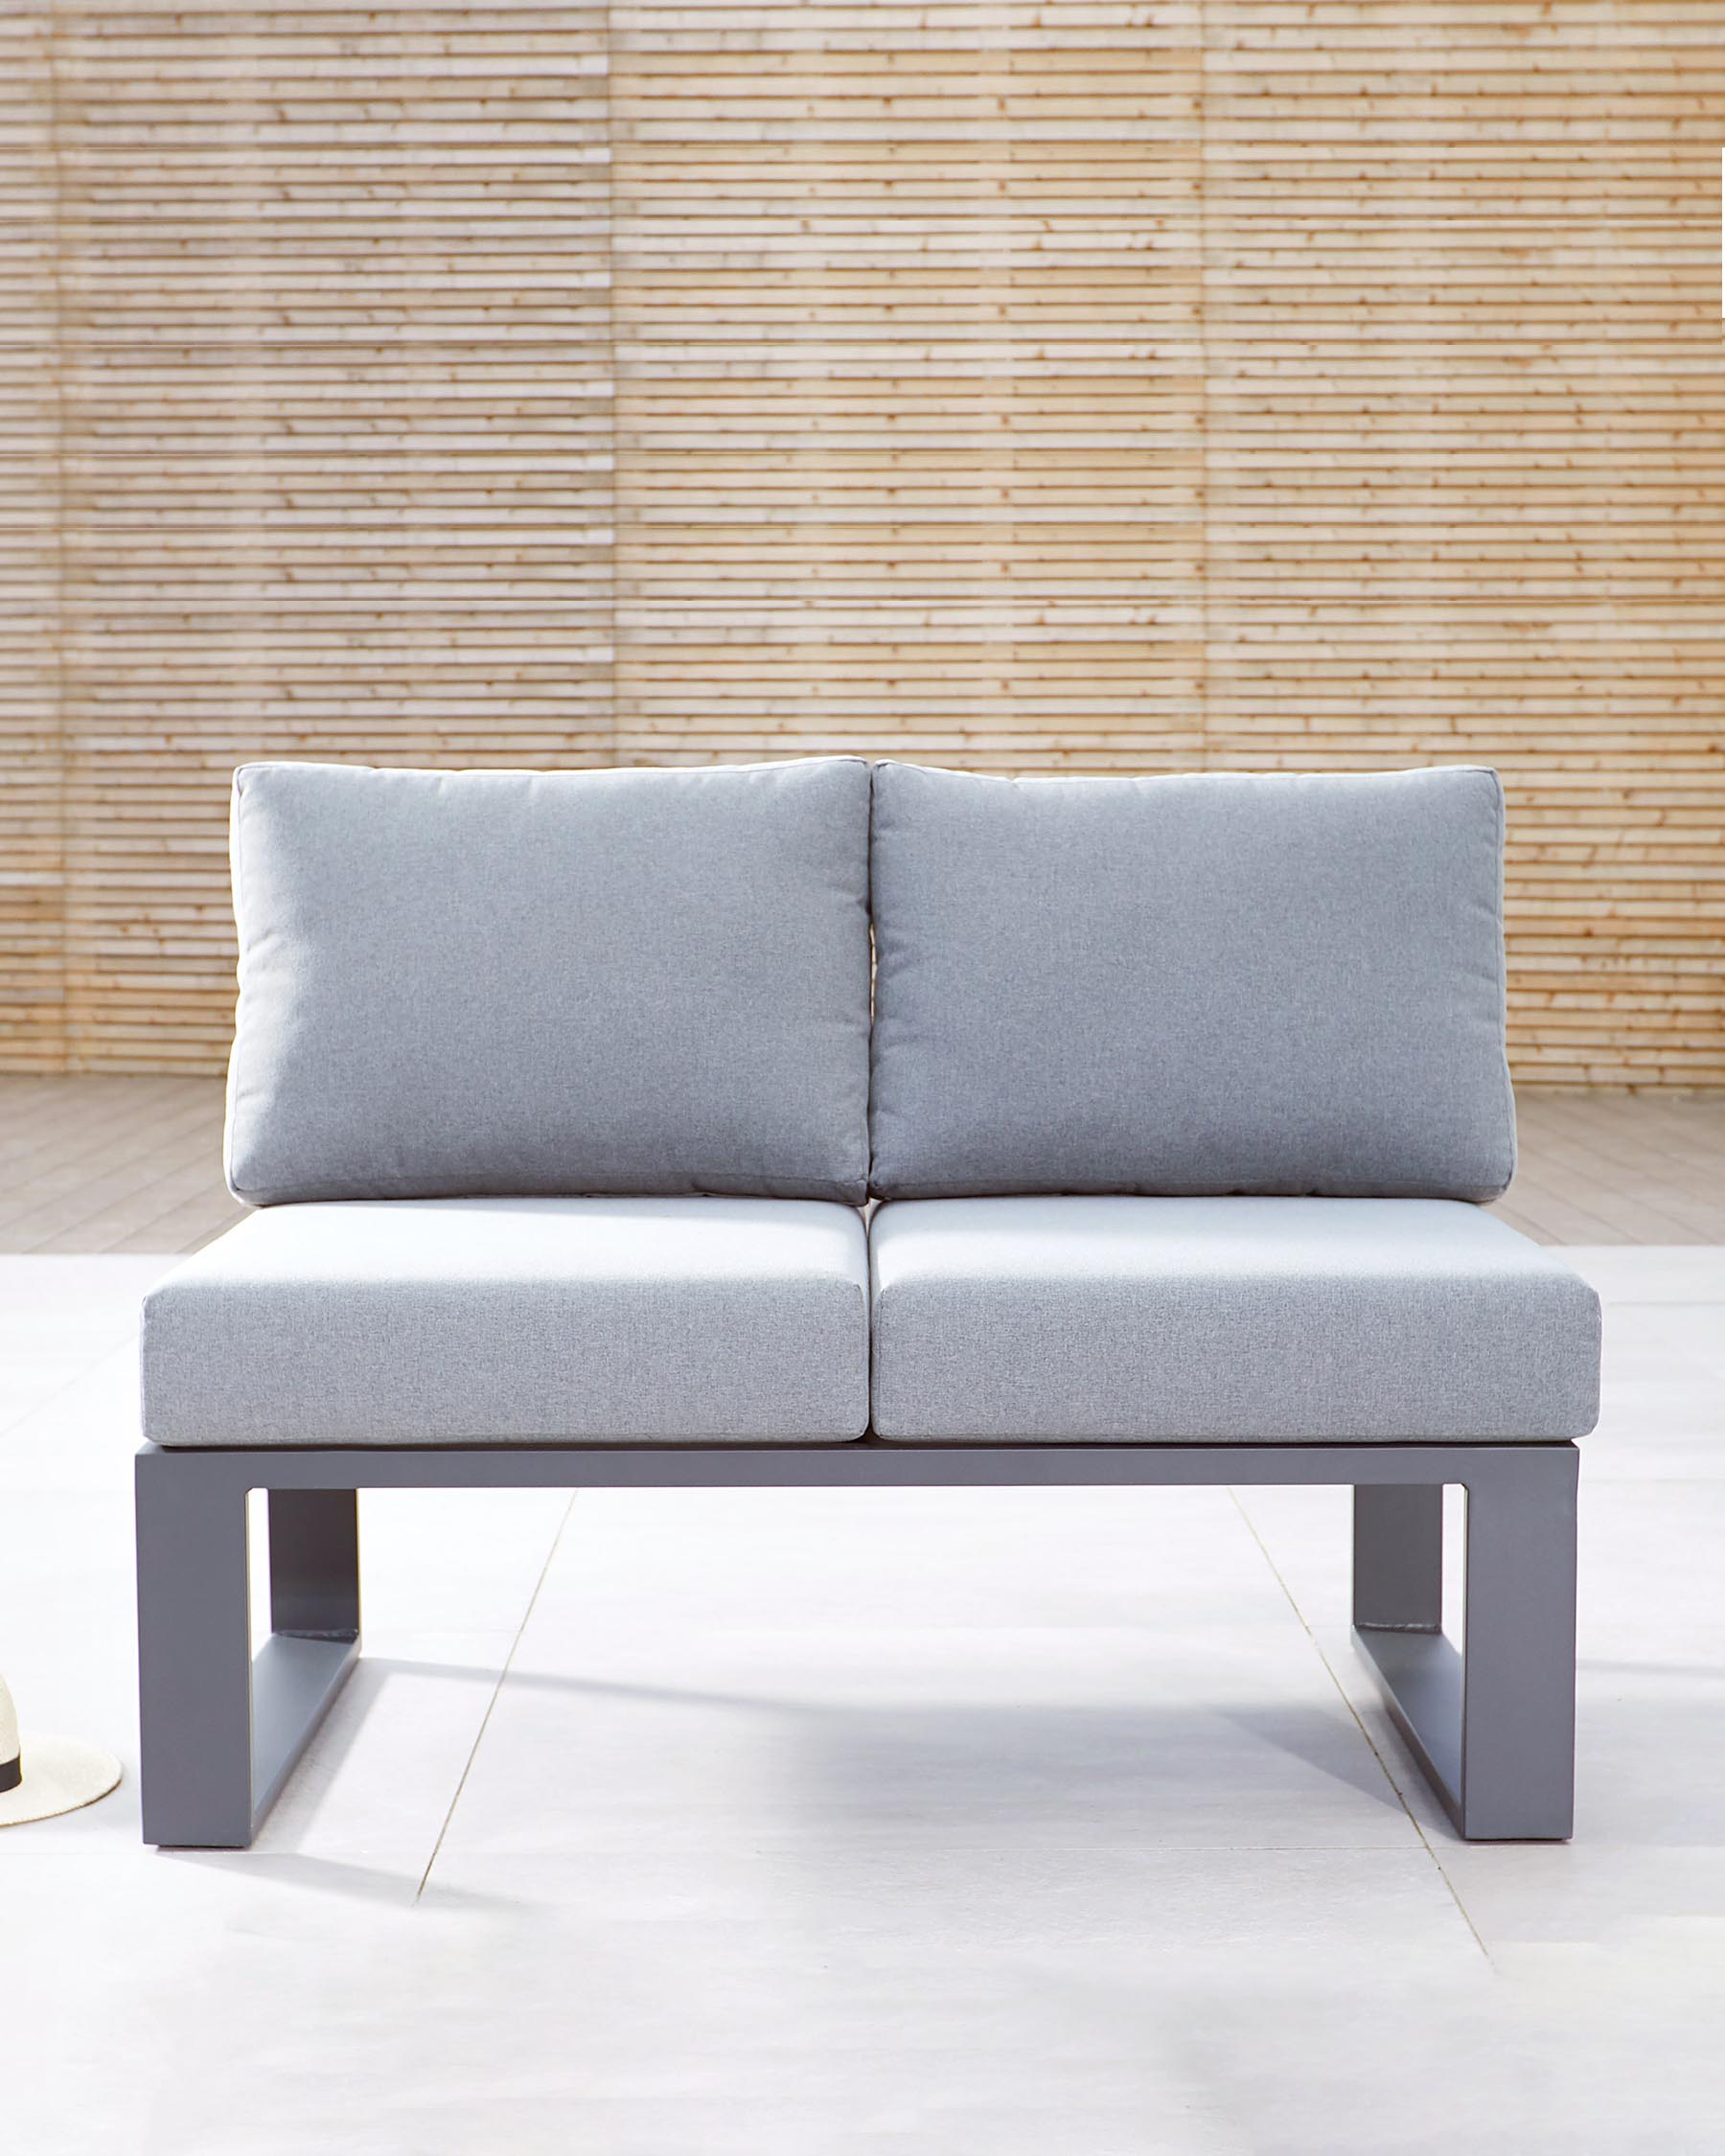 2 Seater Outdoor Sofa By Danetti